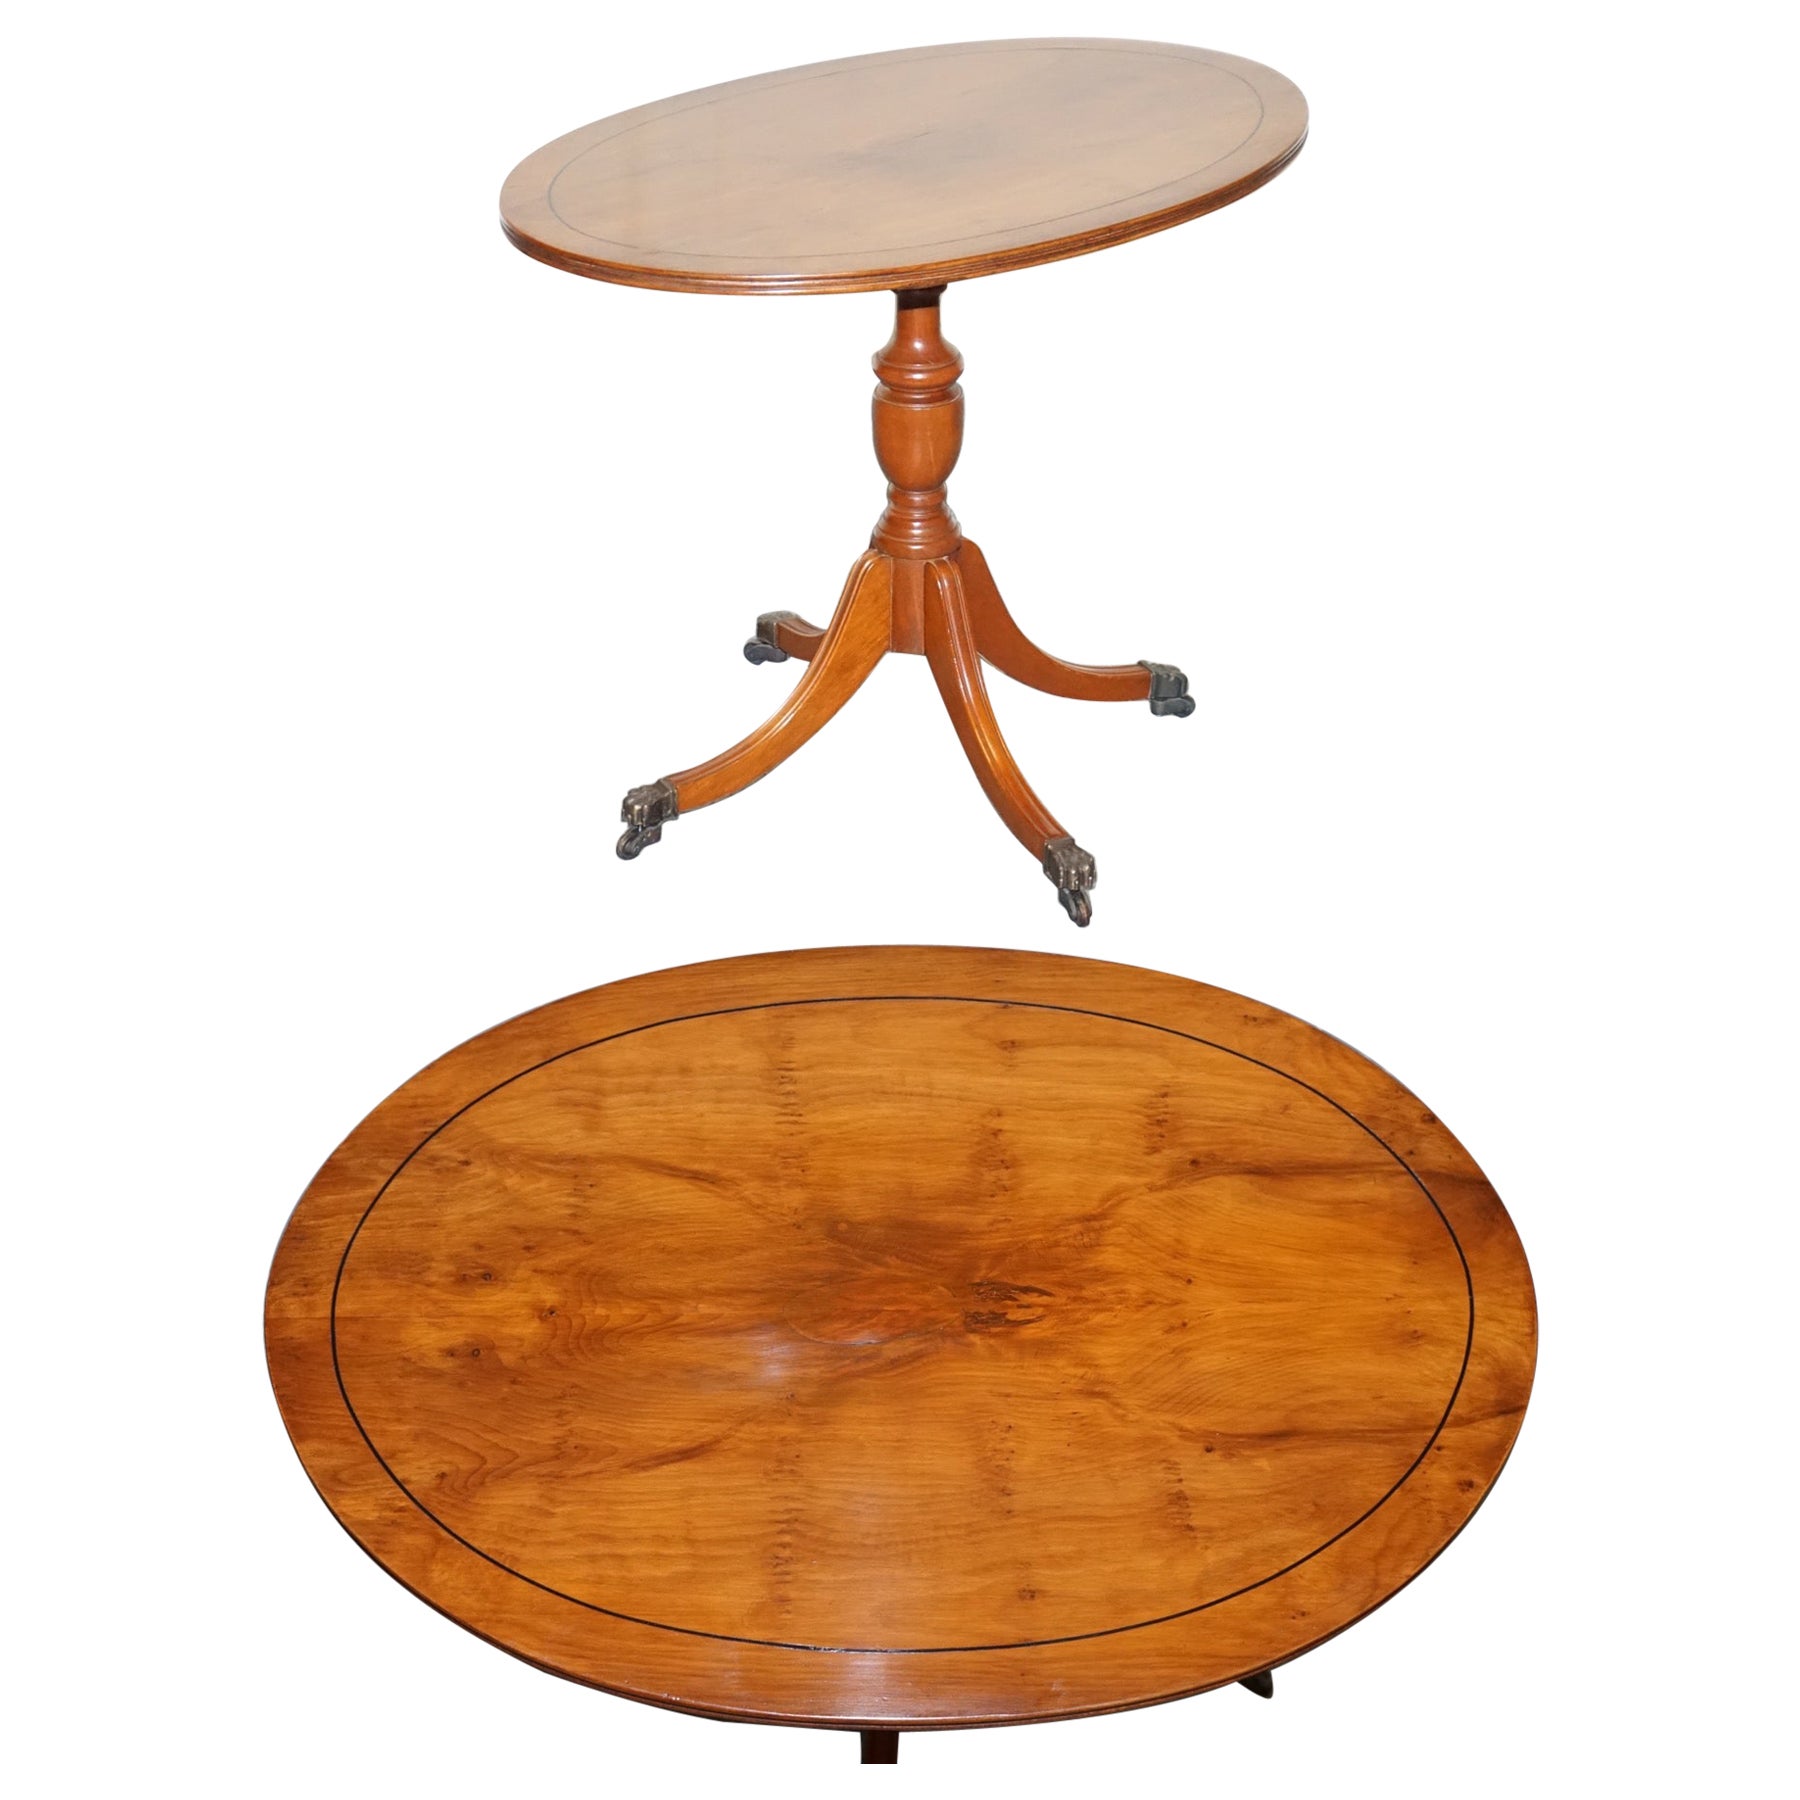 LOVELY VINTAGE OVAL BURR YEW WOOD SIDE TABLE ON TRiPOD LEGS For Sale